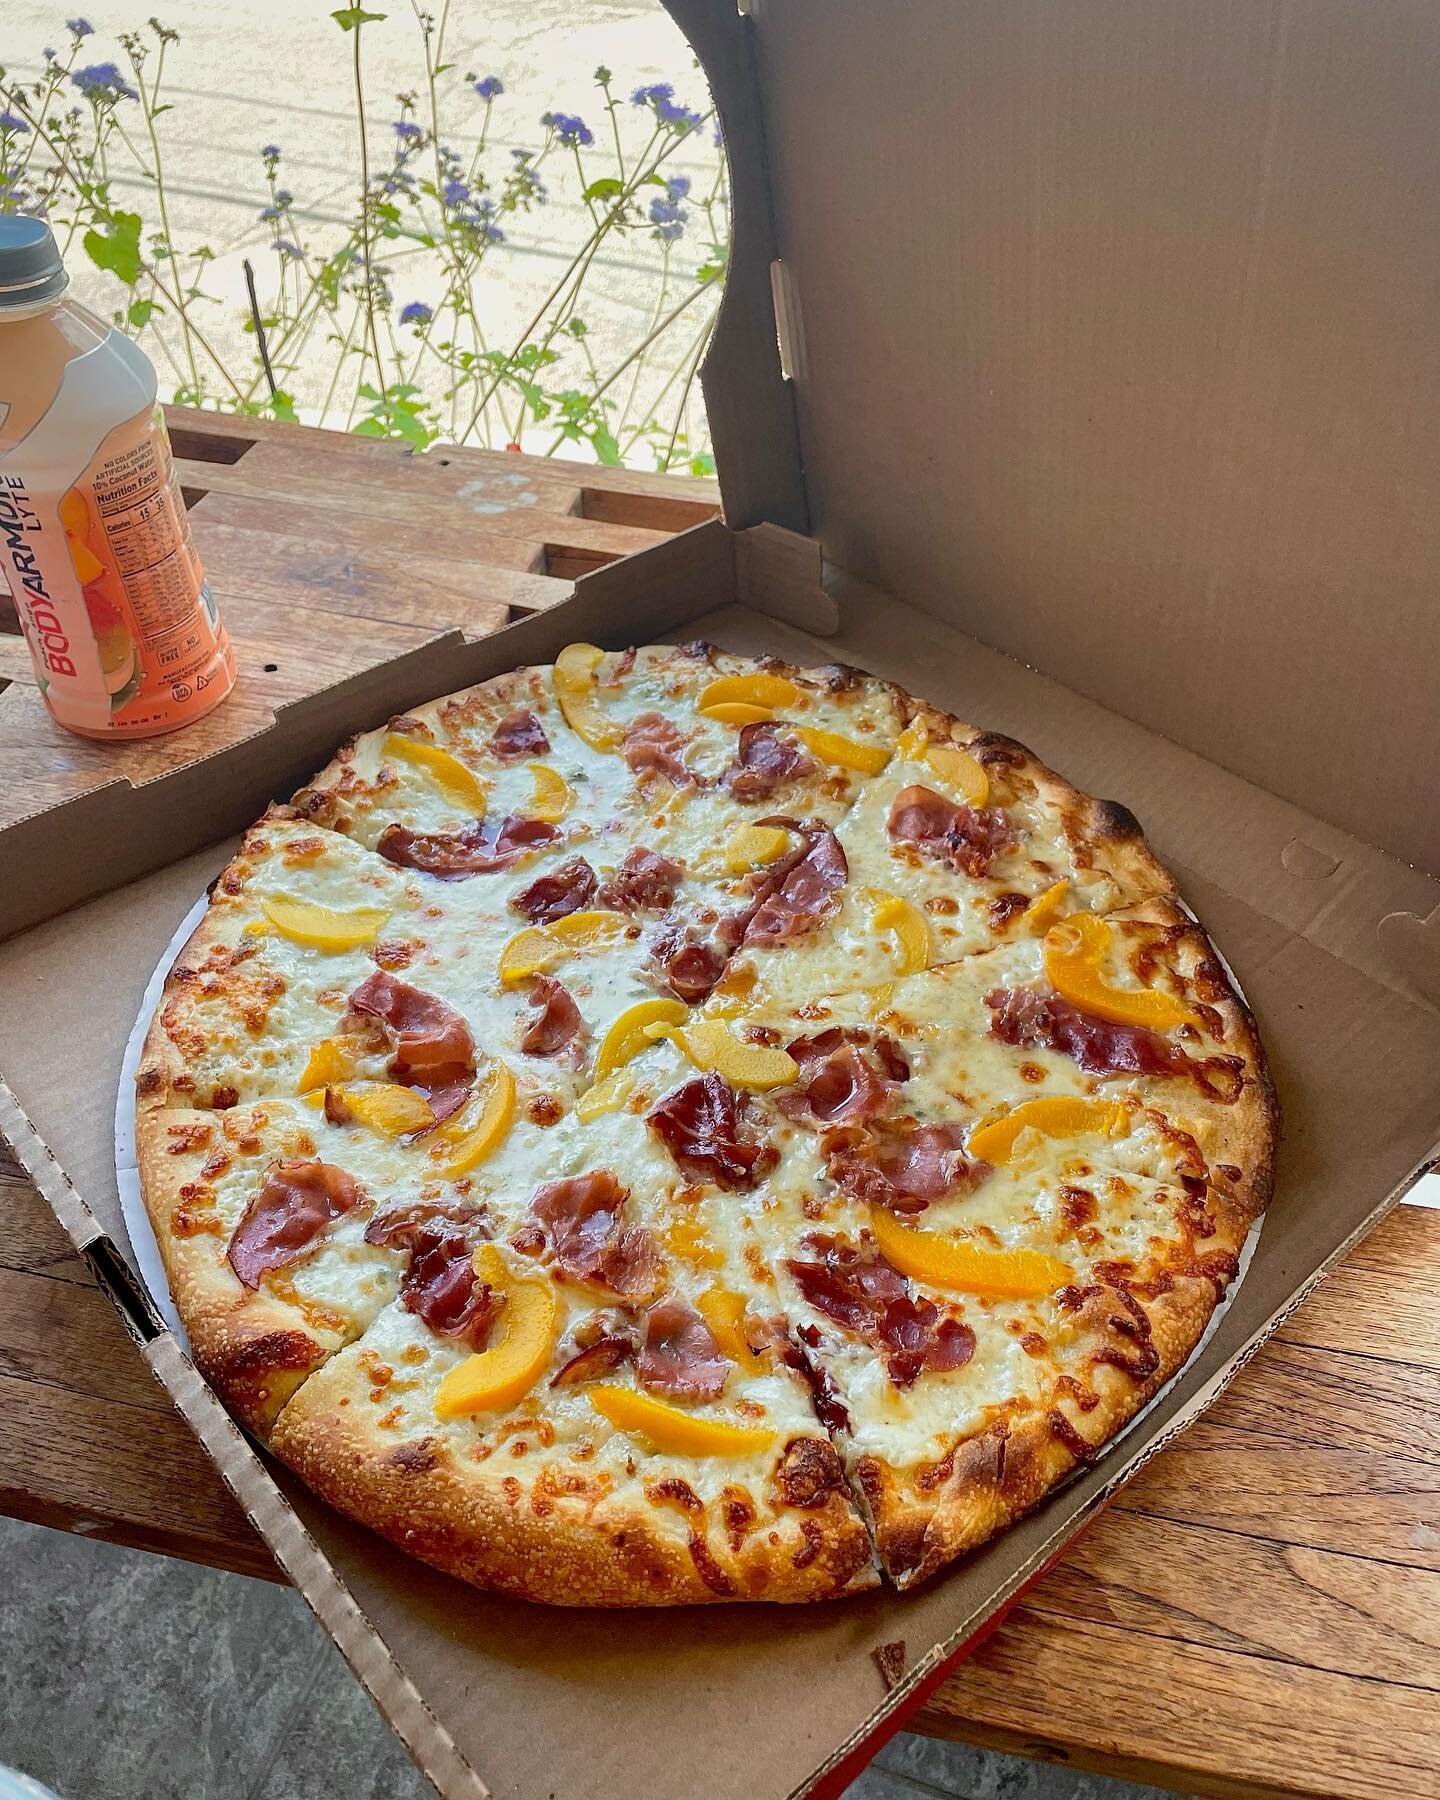 This is our Prosciutto, Peaches, and Gorgonzola pizza. Sweet bites of peach coupled with salty prosciutto make the perfect pairing. Come try this pie at Palmer&rsquo;s. 
.
.
.
.
.
⠀⠀⠀⠀⠀⠀⠀⠀⠀
#noank #noankct #local #shopct #shoplocal #newengland #class